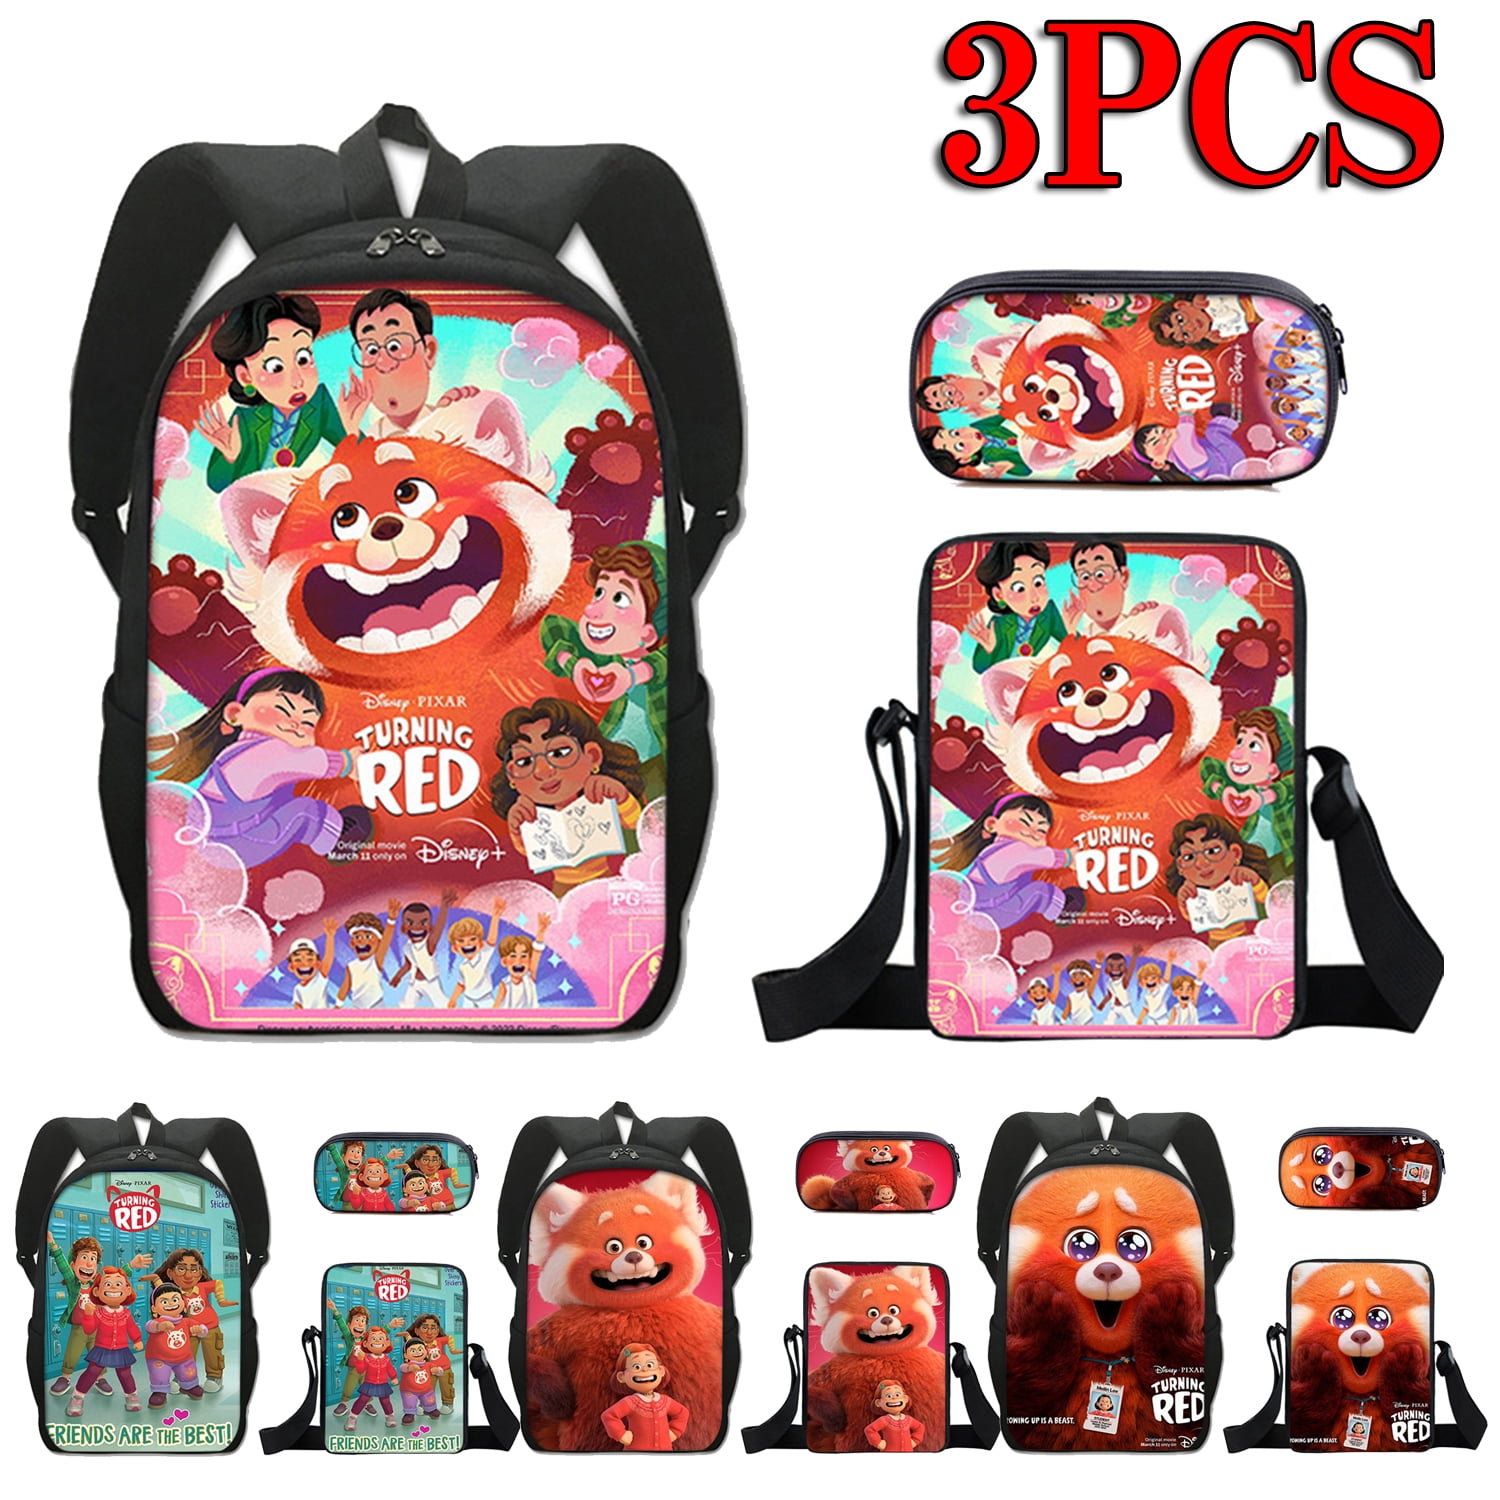 3pcs Kawaii Turning Red Backpack for Children Boys Girls Travel Laptop School Bags with Crossbody Bags Pencil Box (#4), Kids Unisex